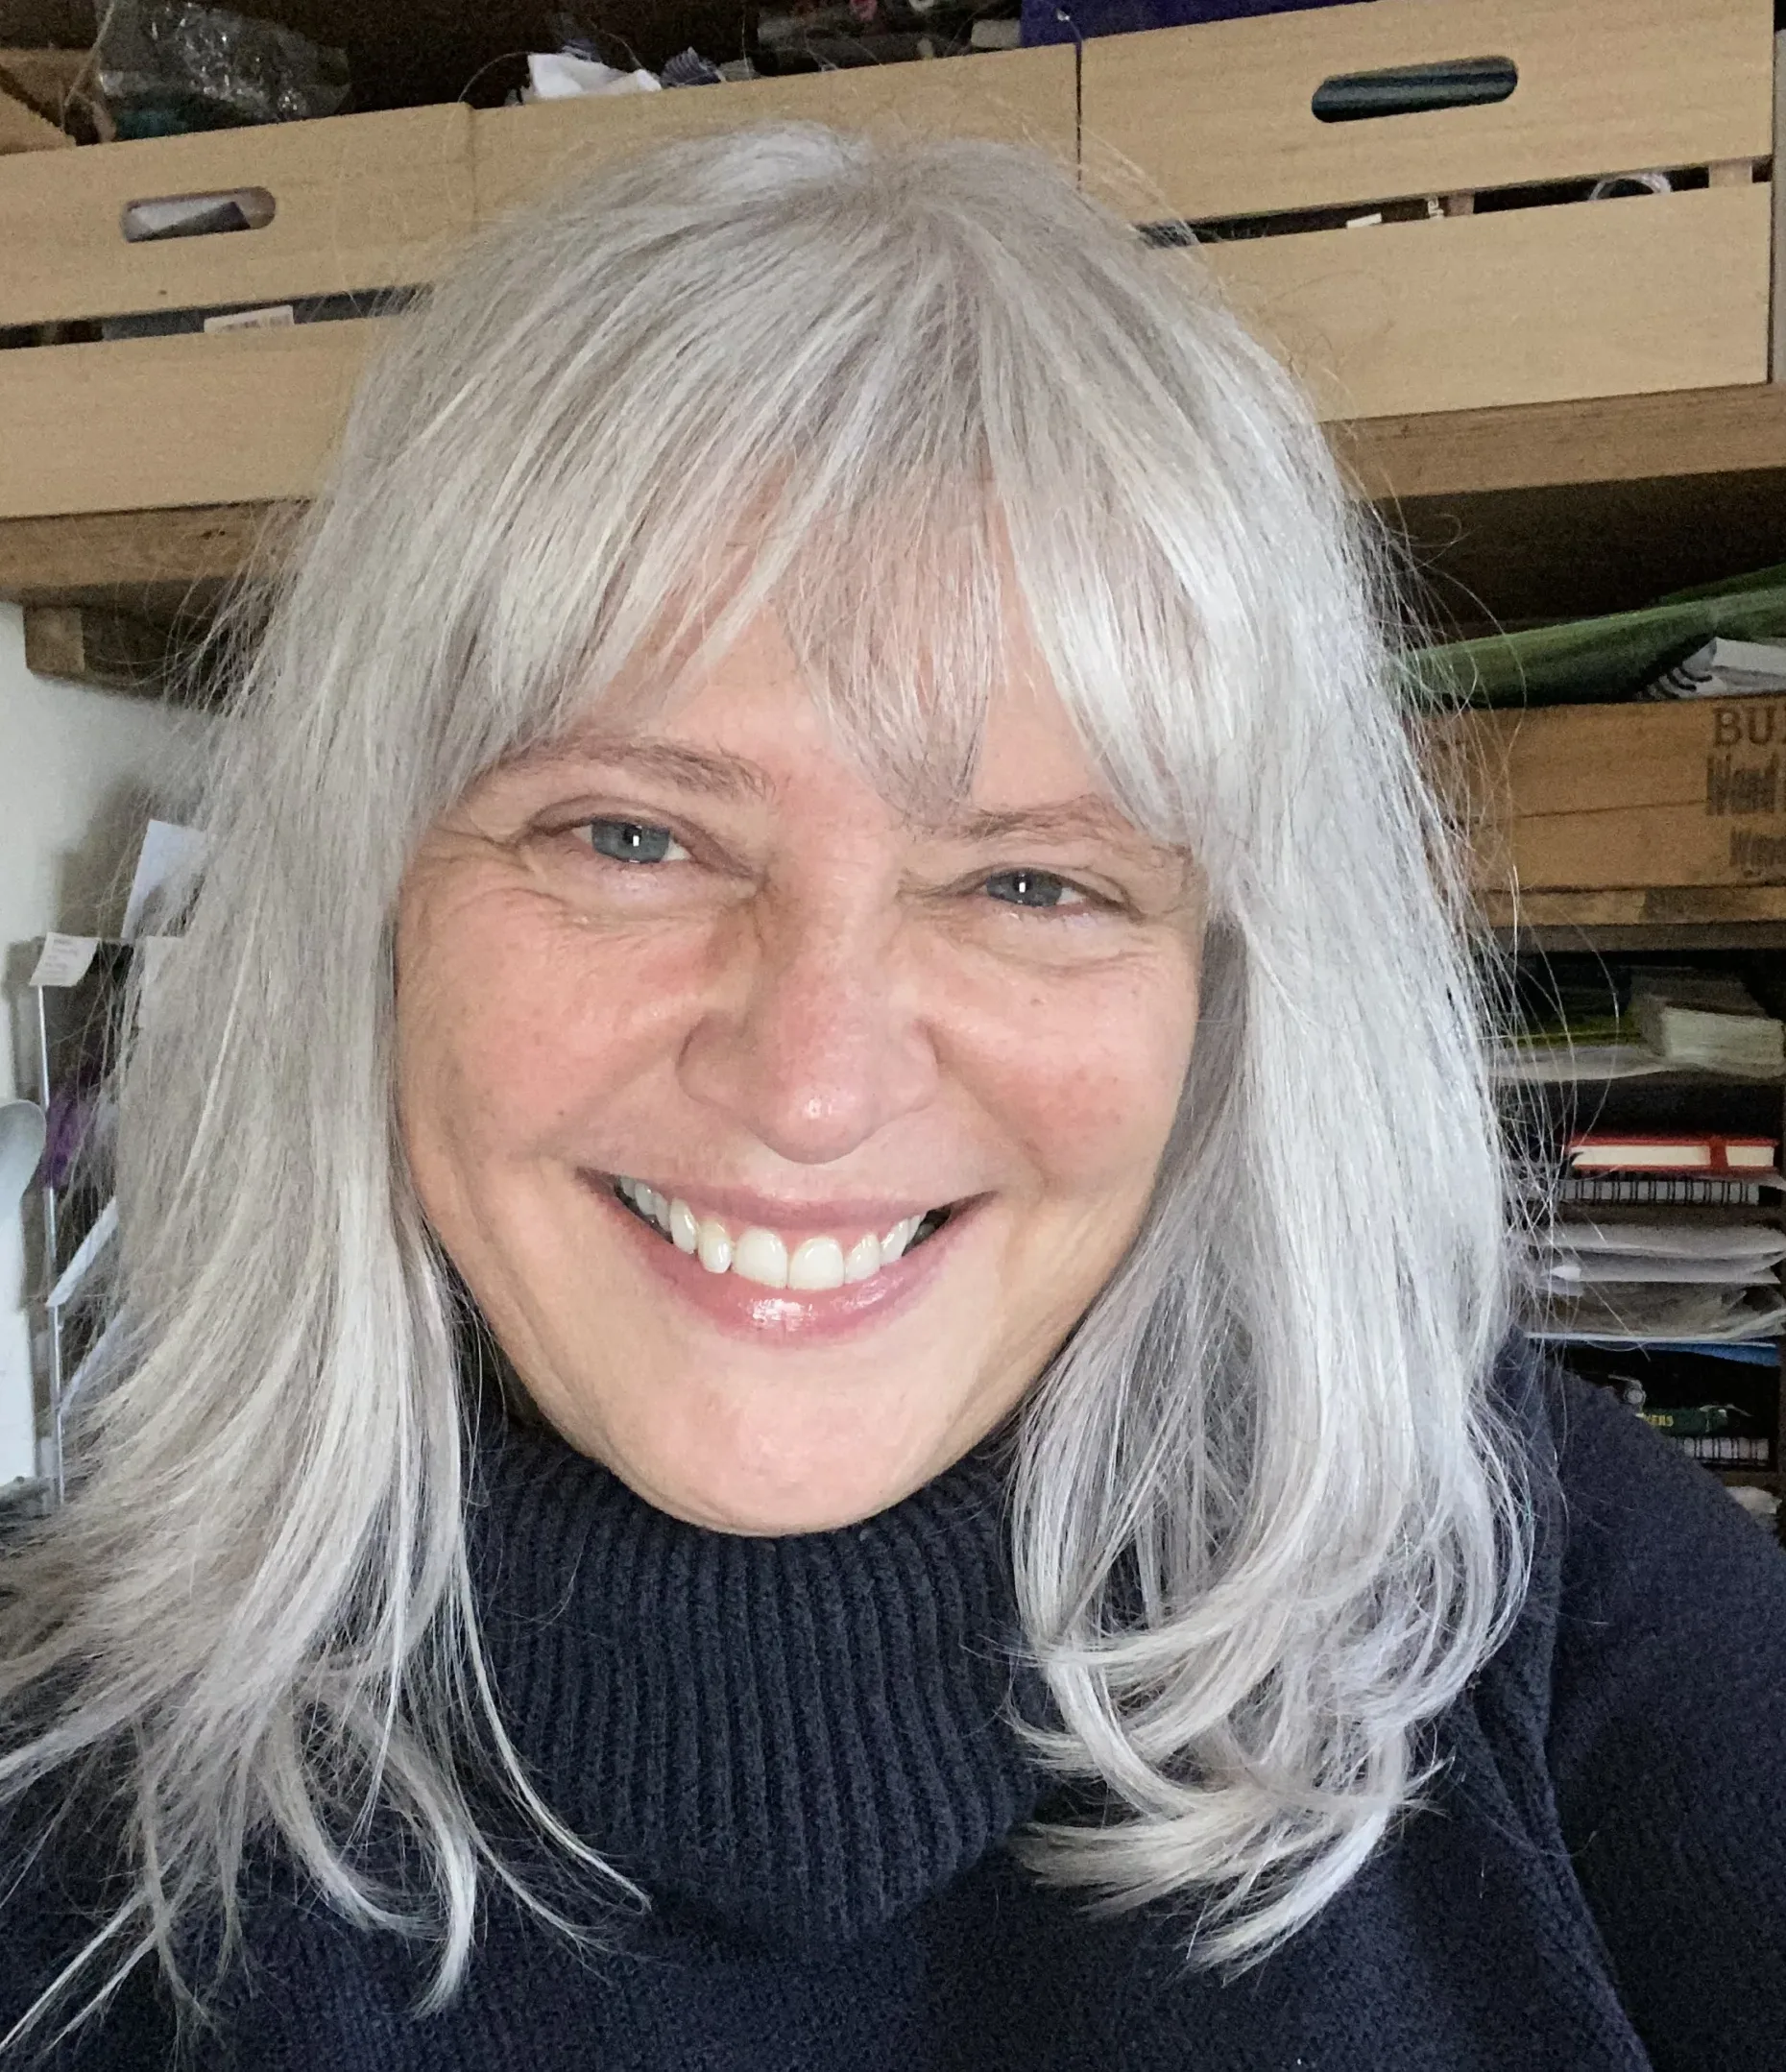 Our Access Champion Vicky Ackroyd is a white woman and has shoulder length white hair with a fringe and light eyes.